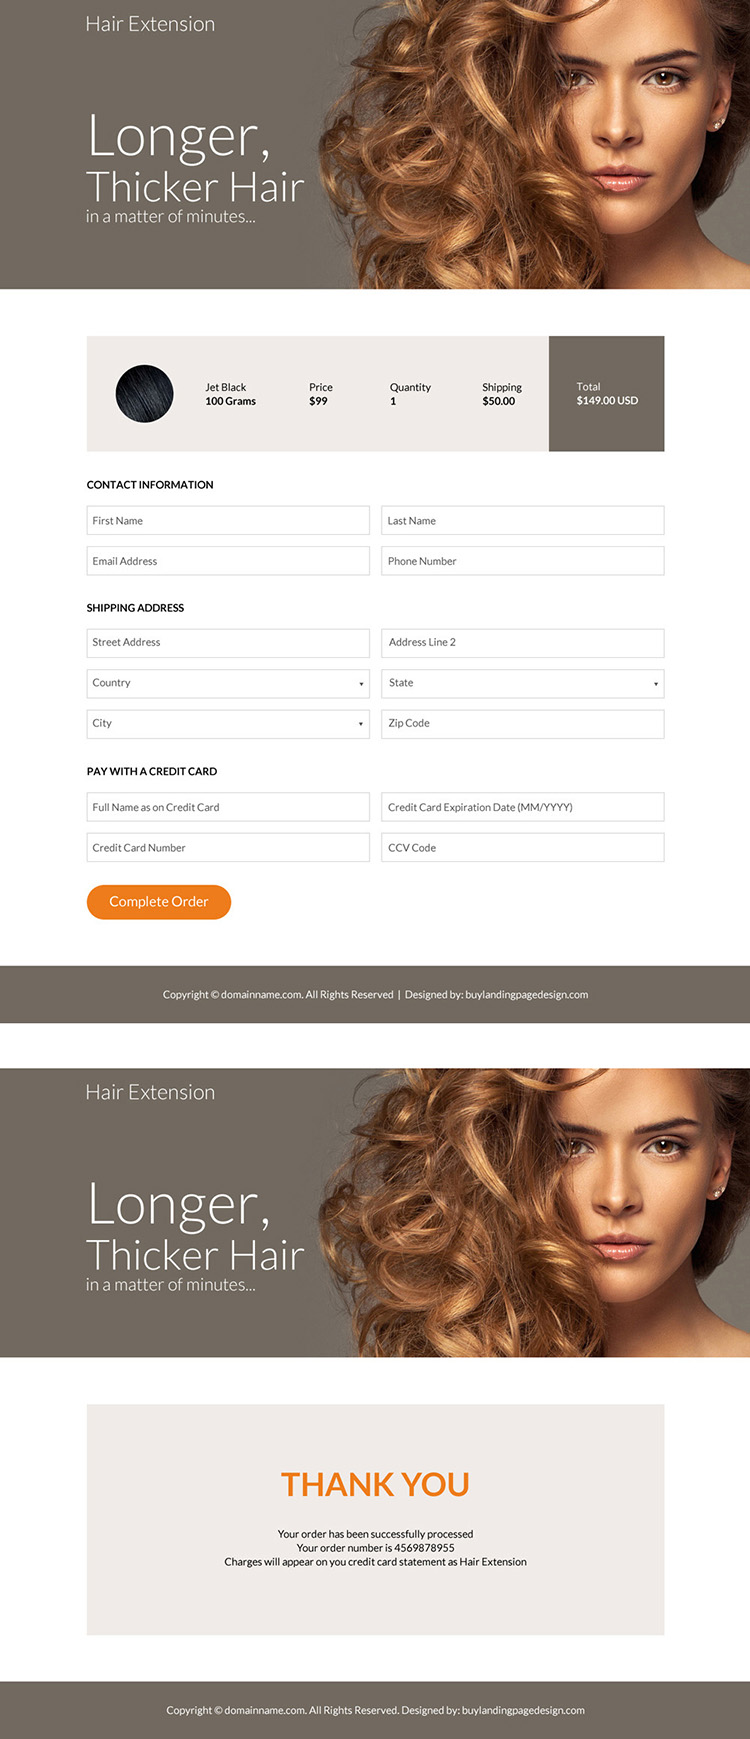 professional hair extension selling responsive landing page design